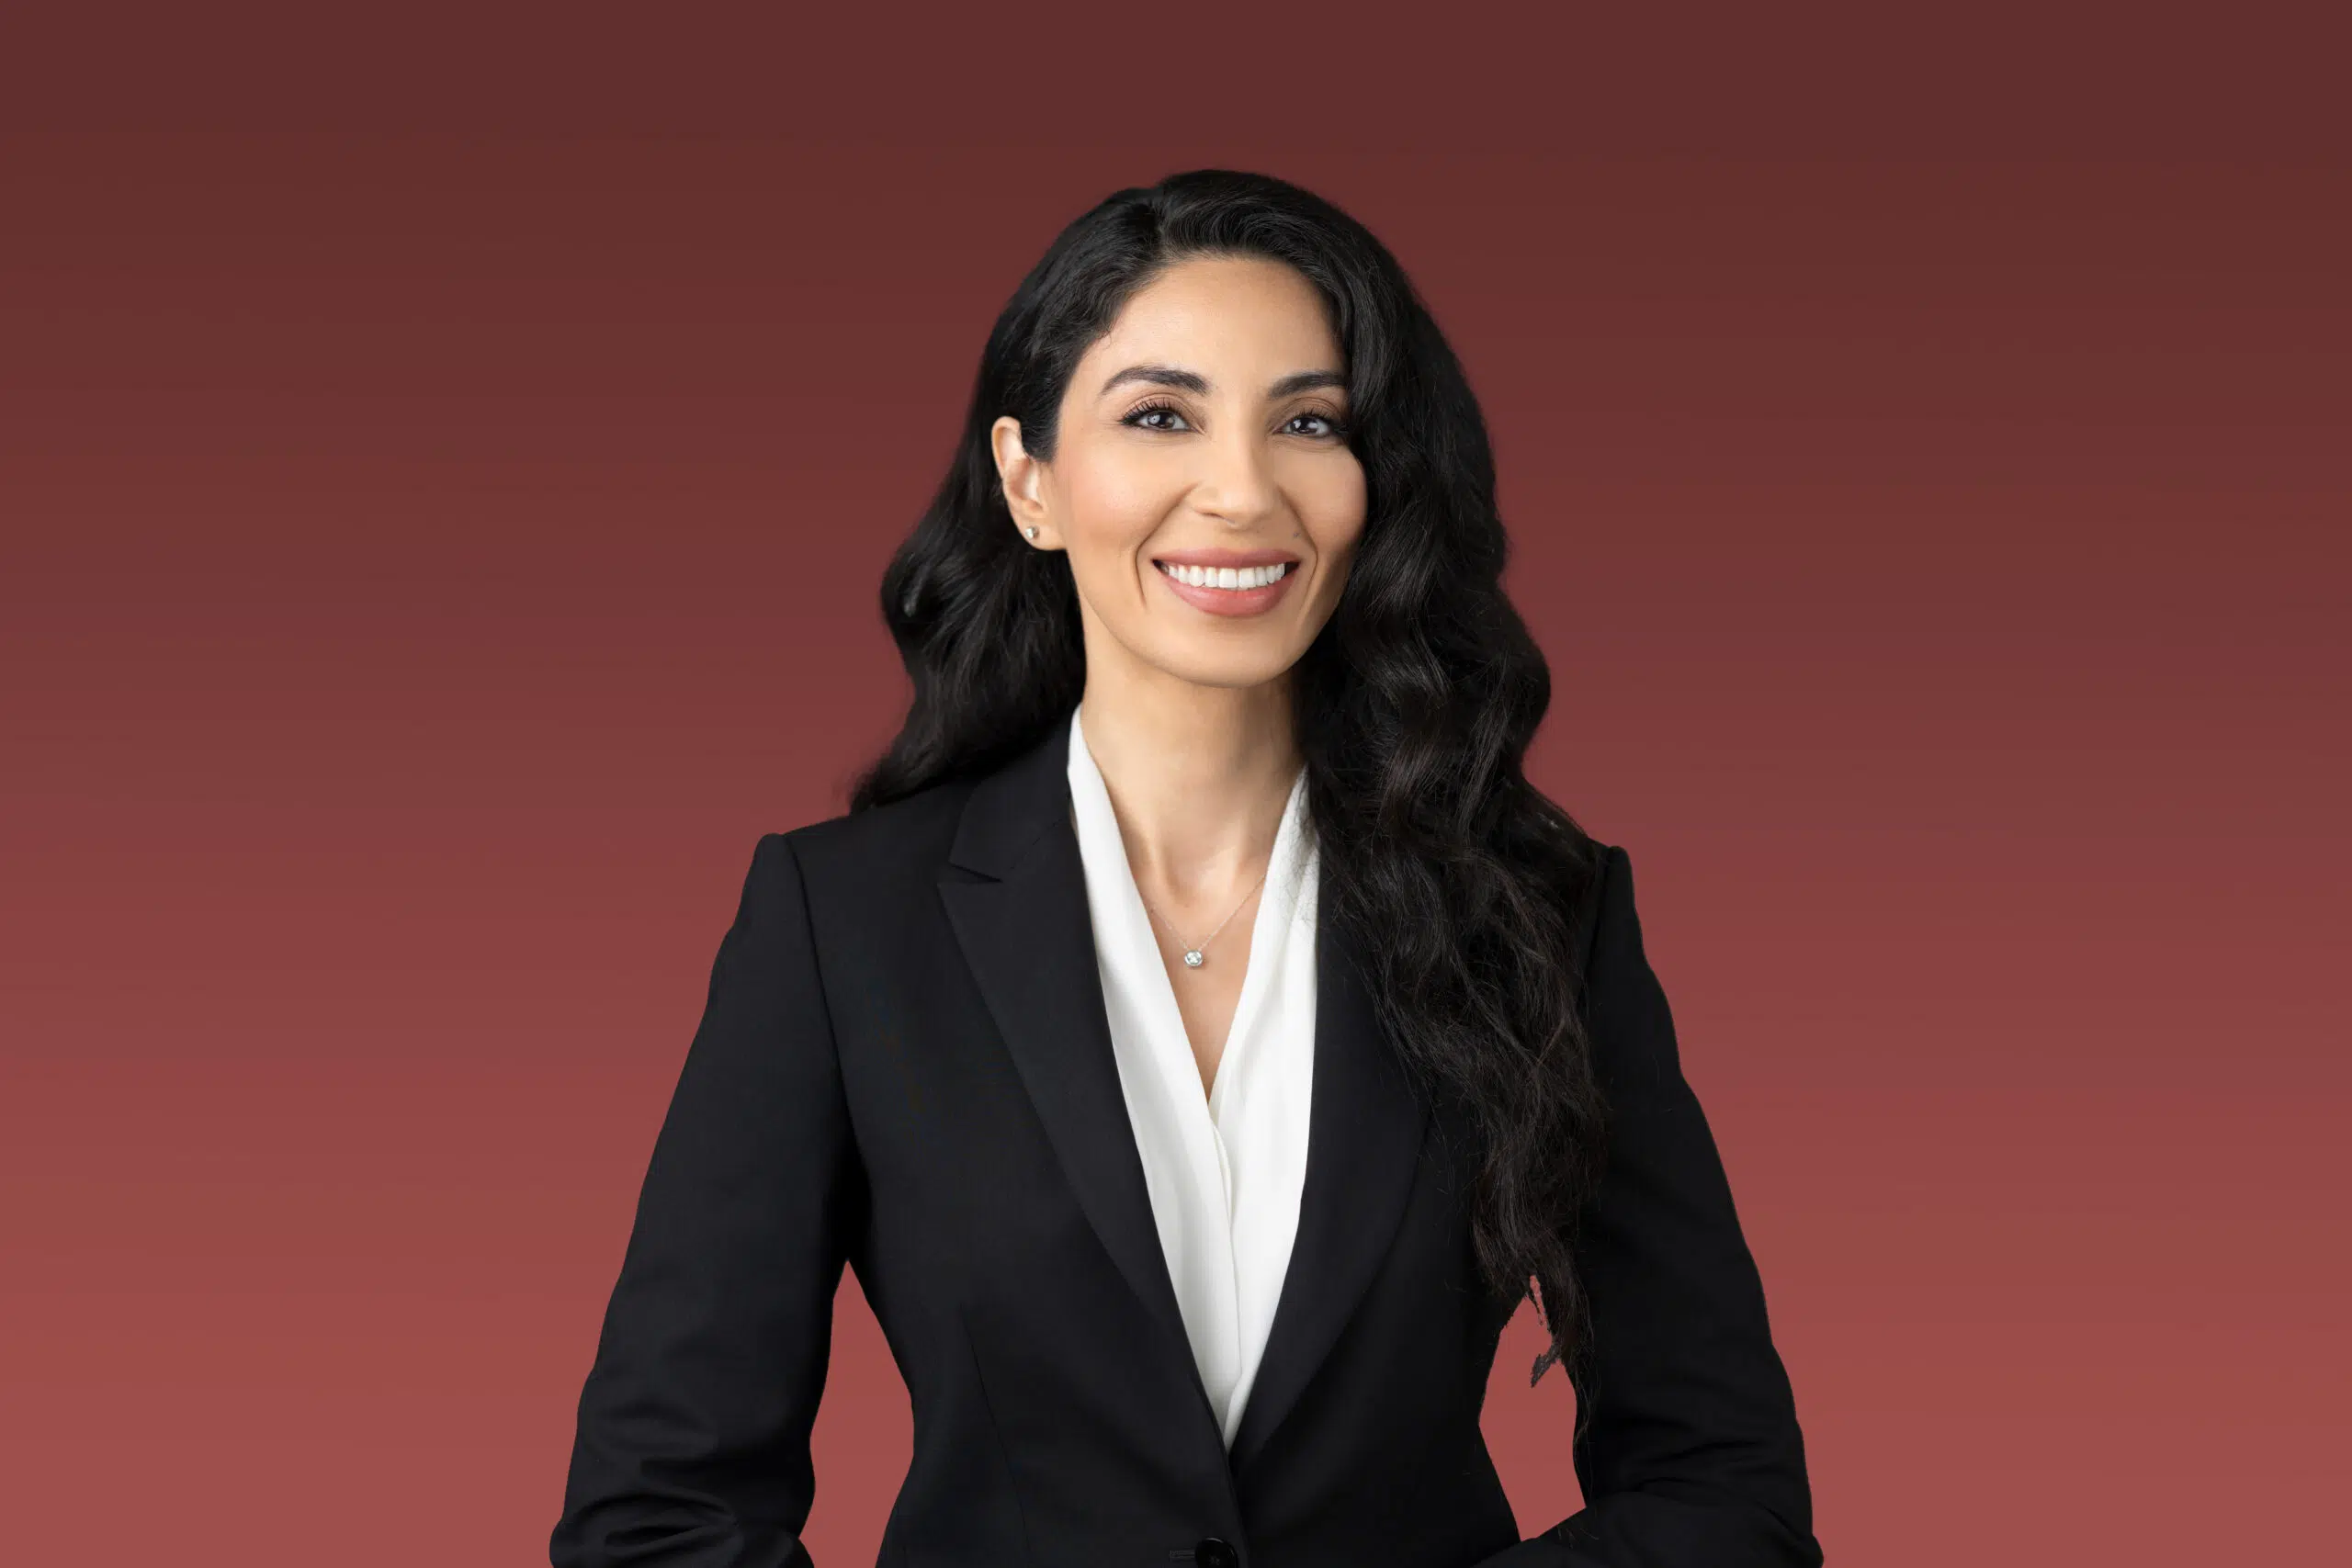 Professional headshot of a woman in a suit